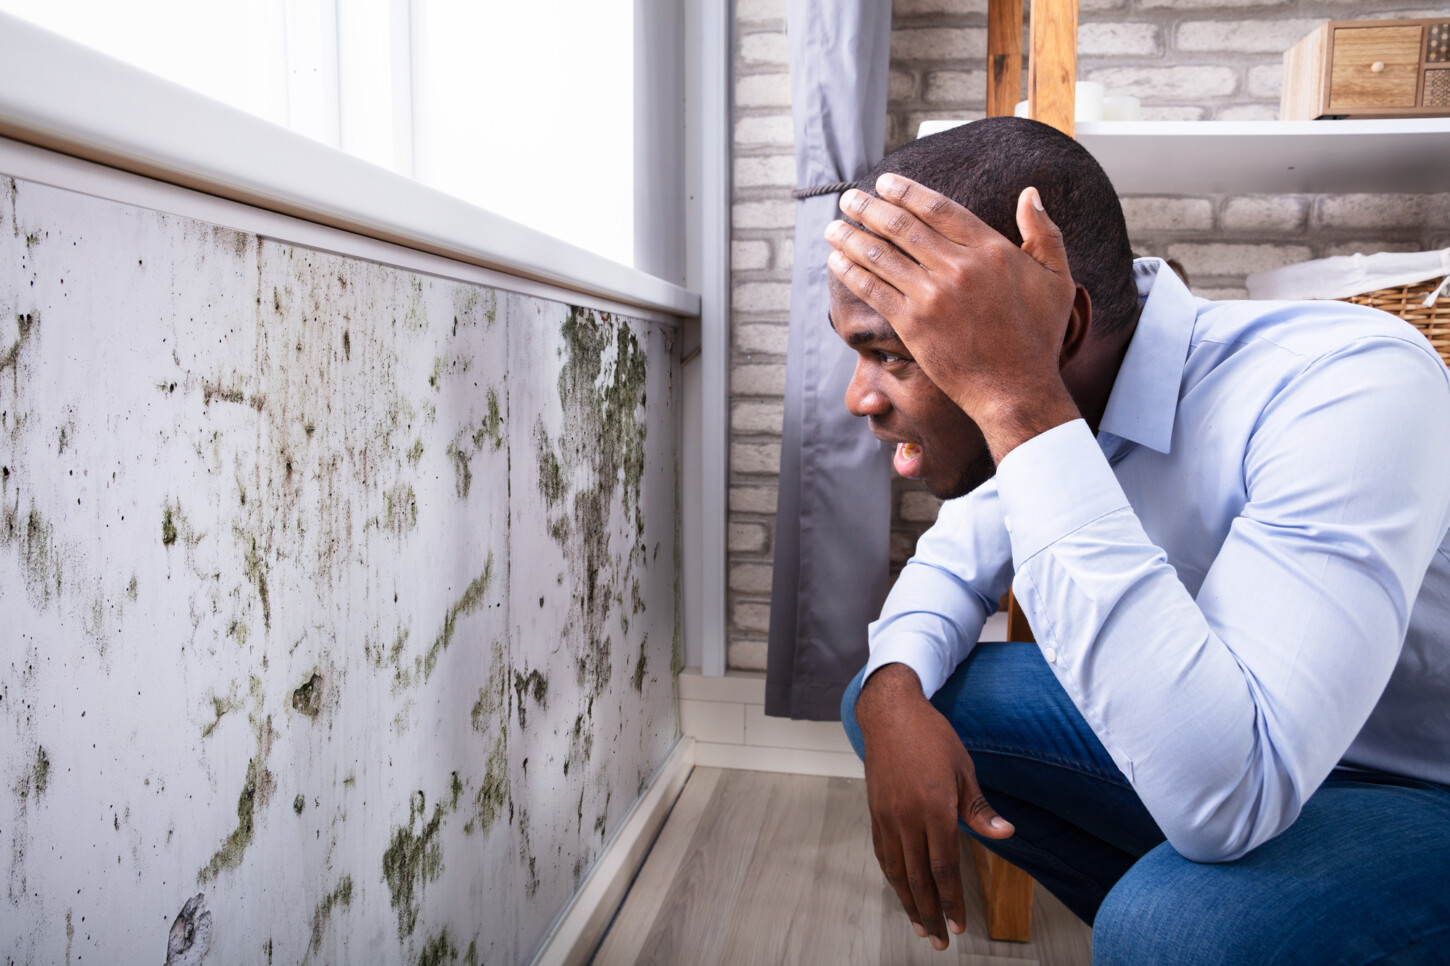 ERMI image showing man looking at mold on wall